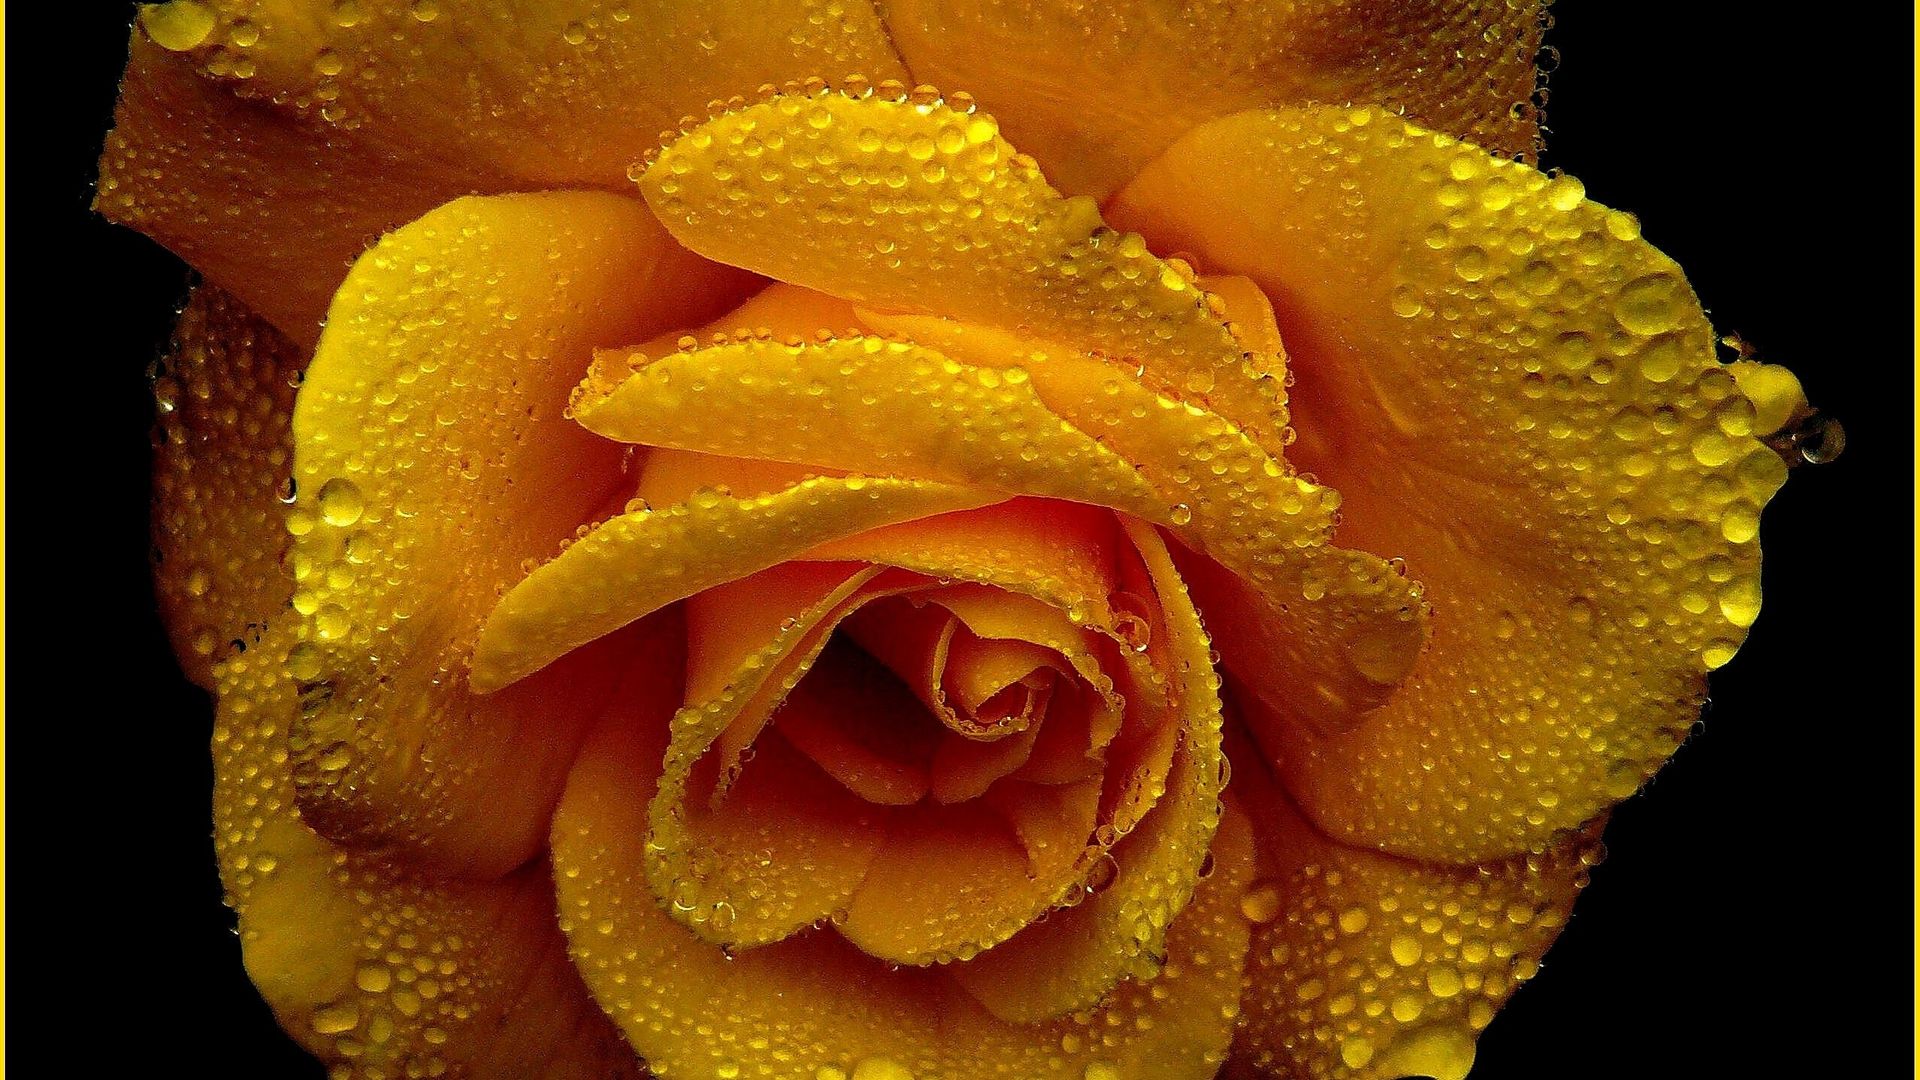 Yellow Rose With Water Drops Dark Background - Yellow Flower With Water Droplets - HD Wallpaper 